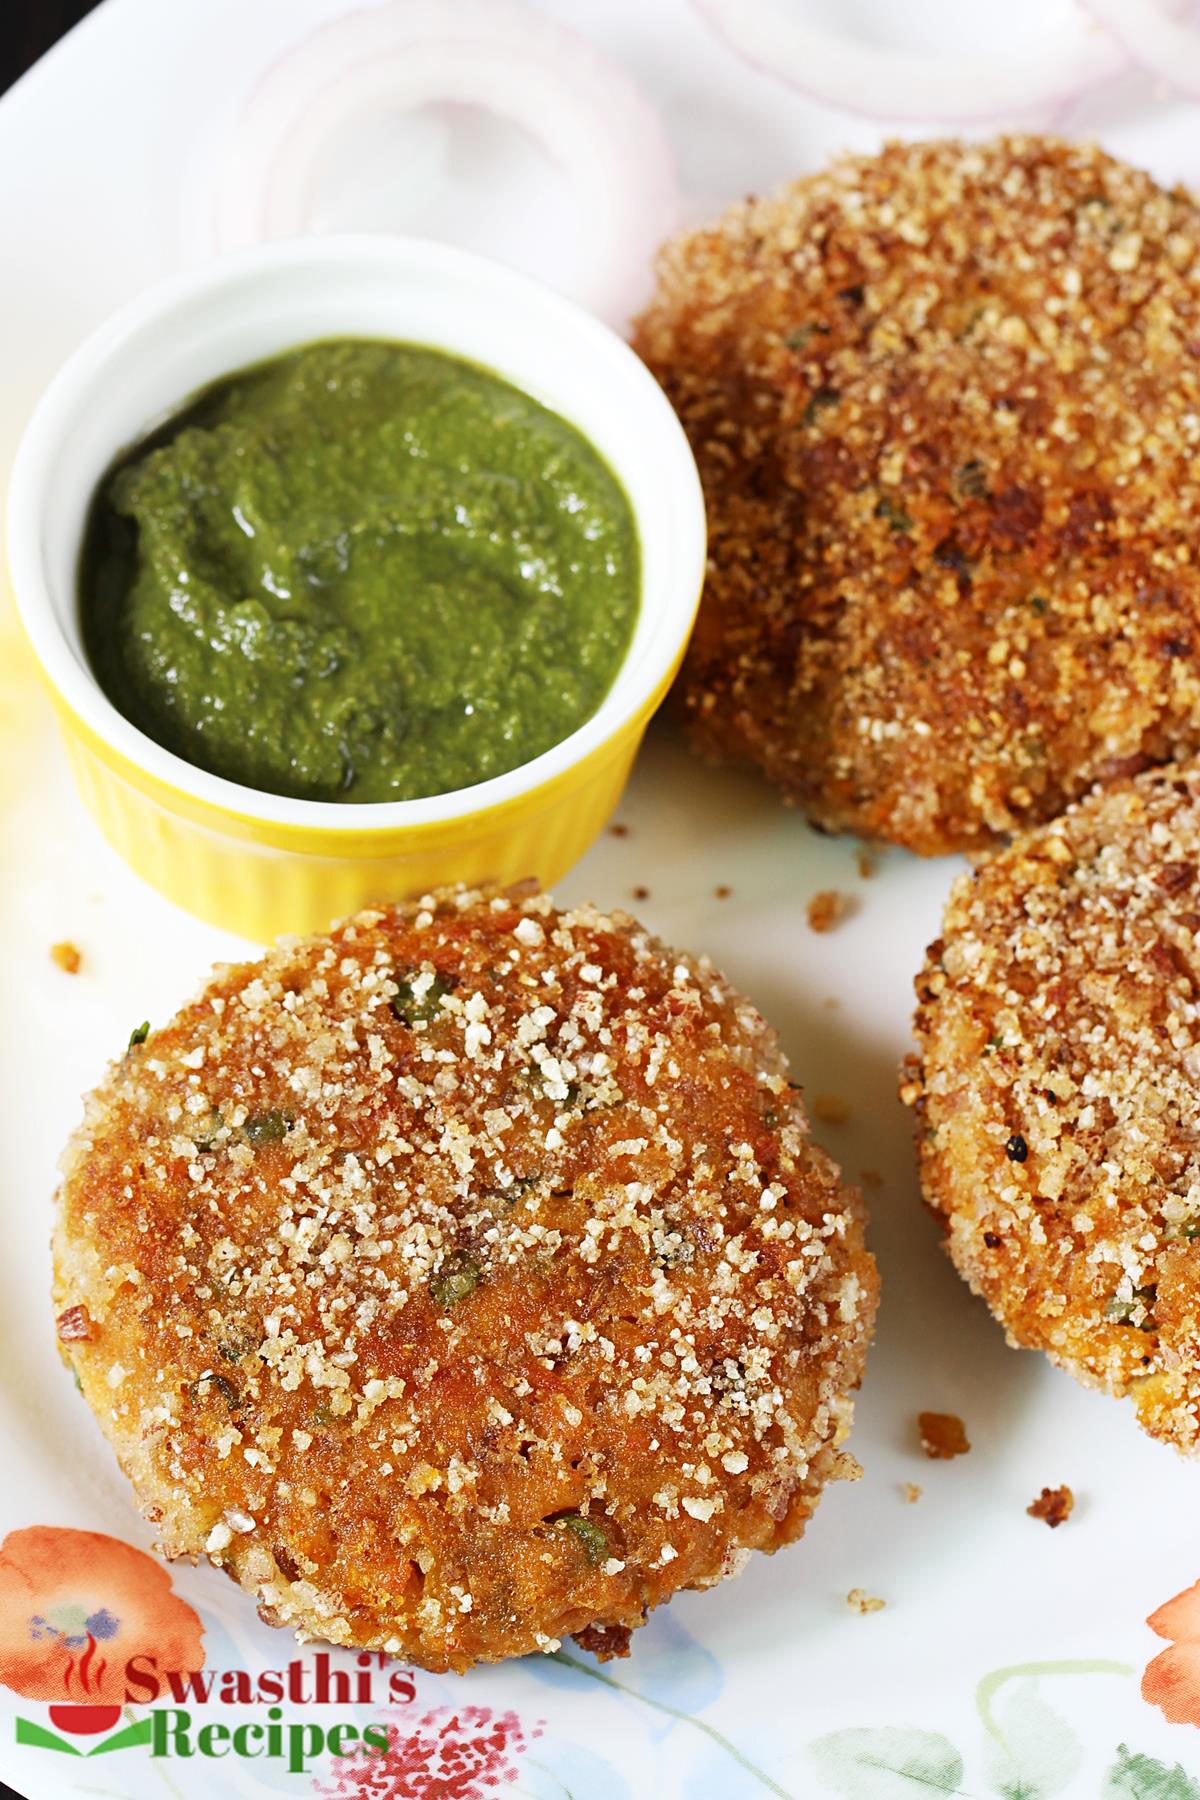 Soya Burger with Soya Granules Cutlet - Swasthi's Recipes